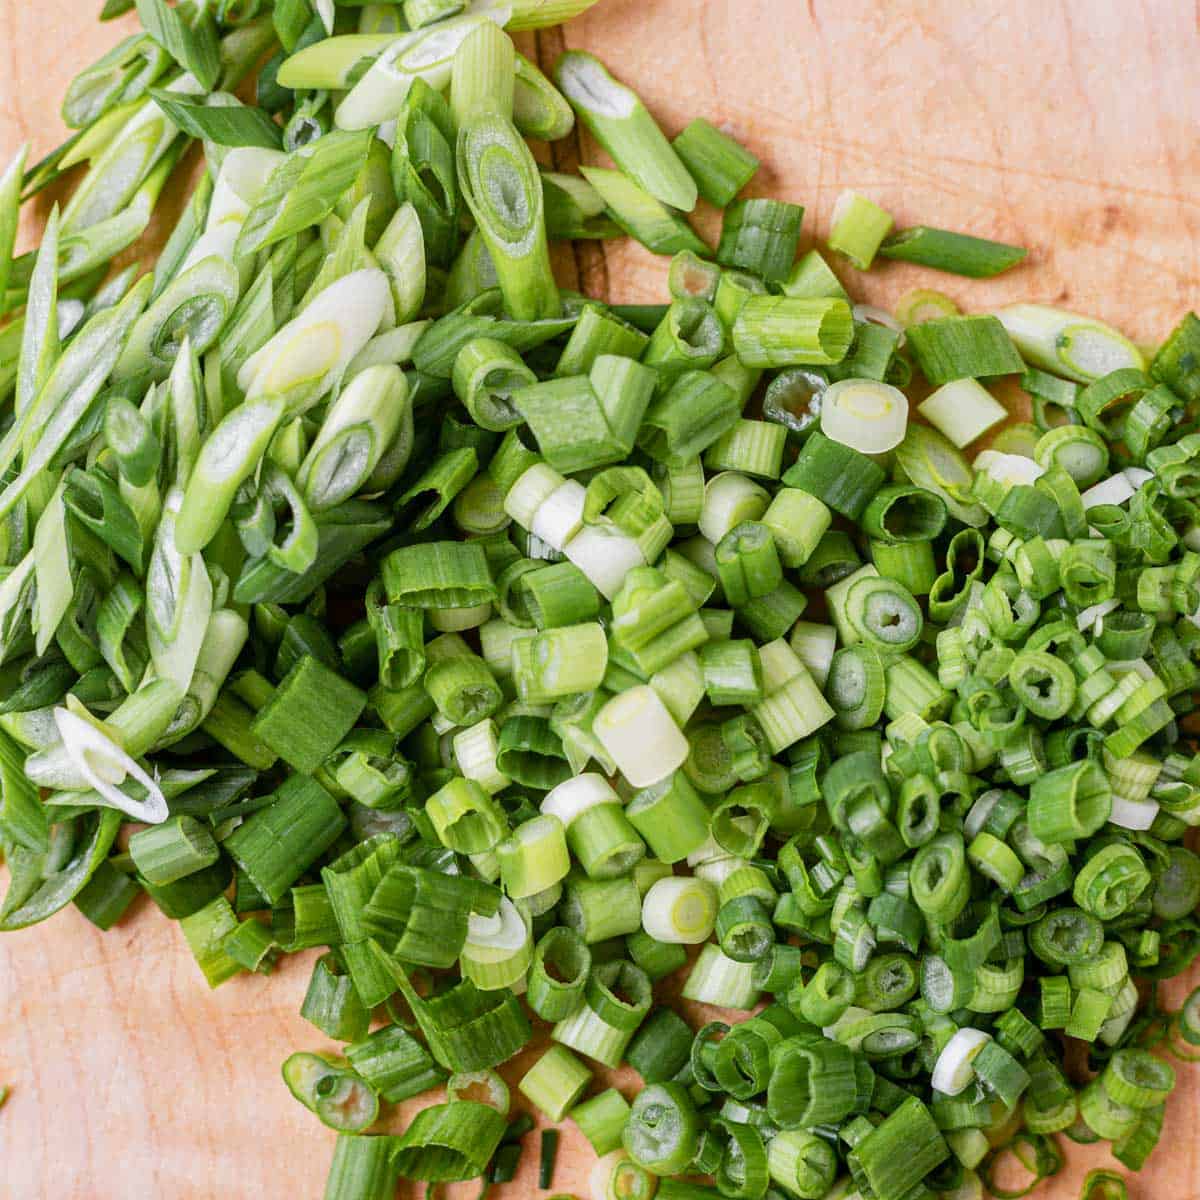 How to Cut Green Onions (4 Easy Steps)